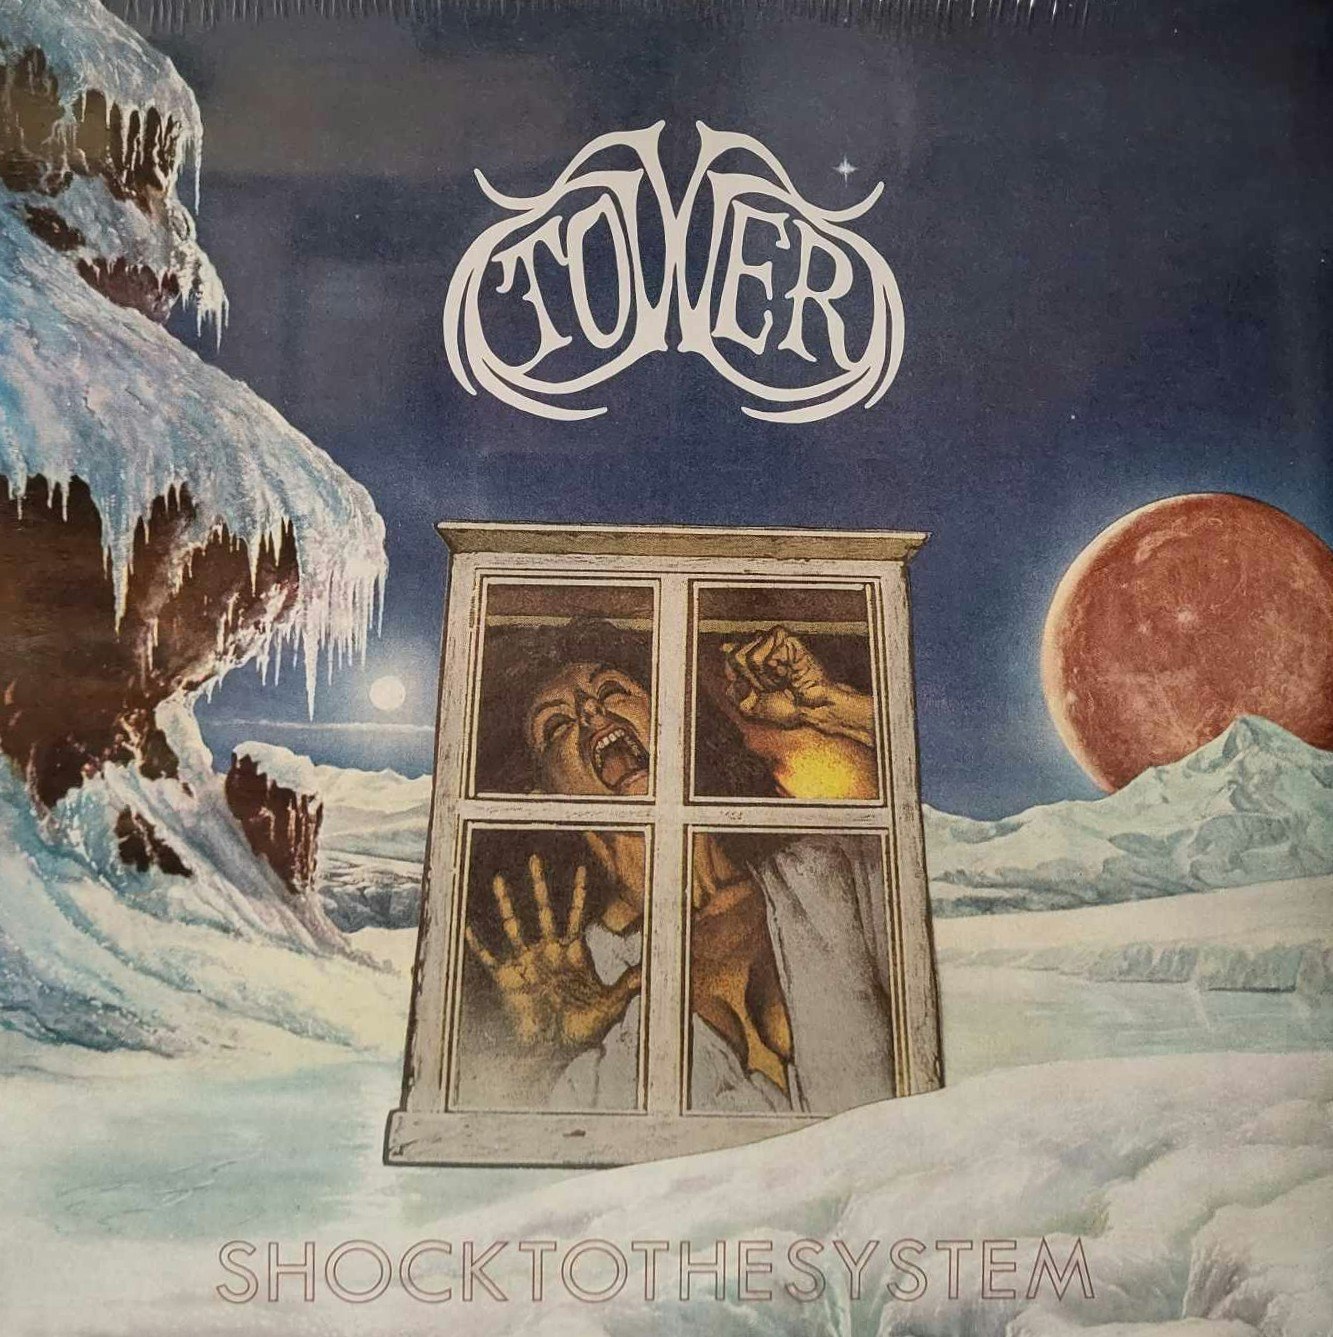 TOWER - SHOCK TO THE SYSTEM